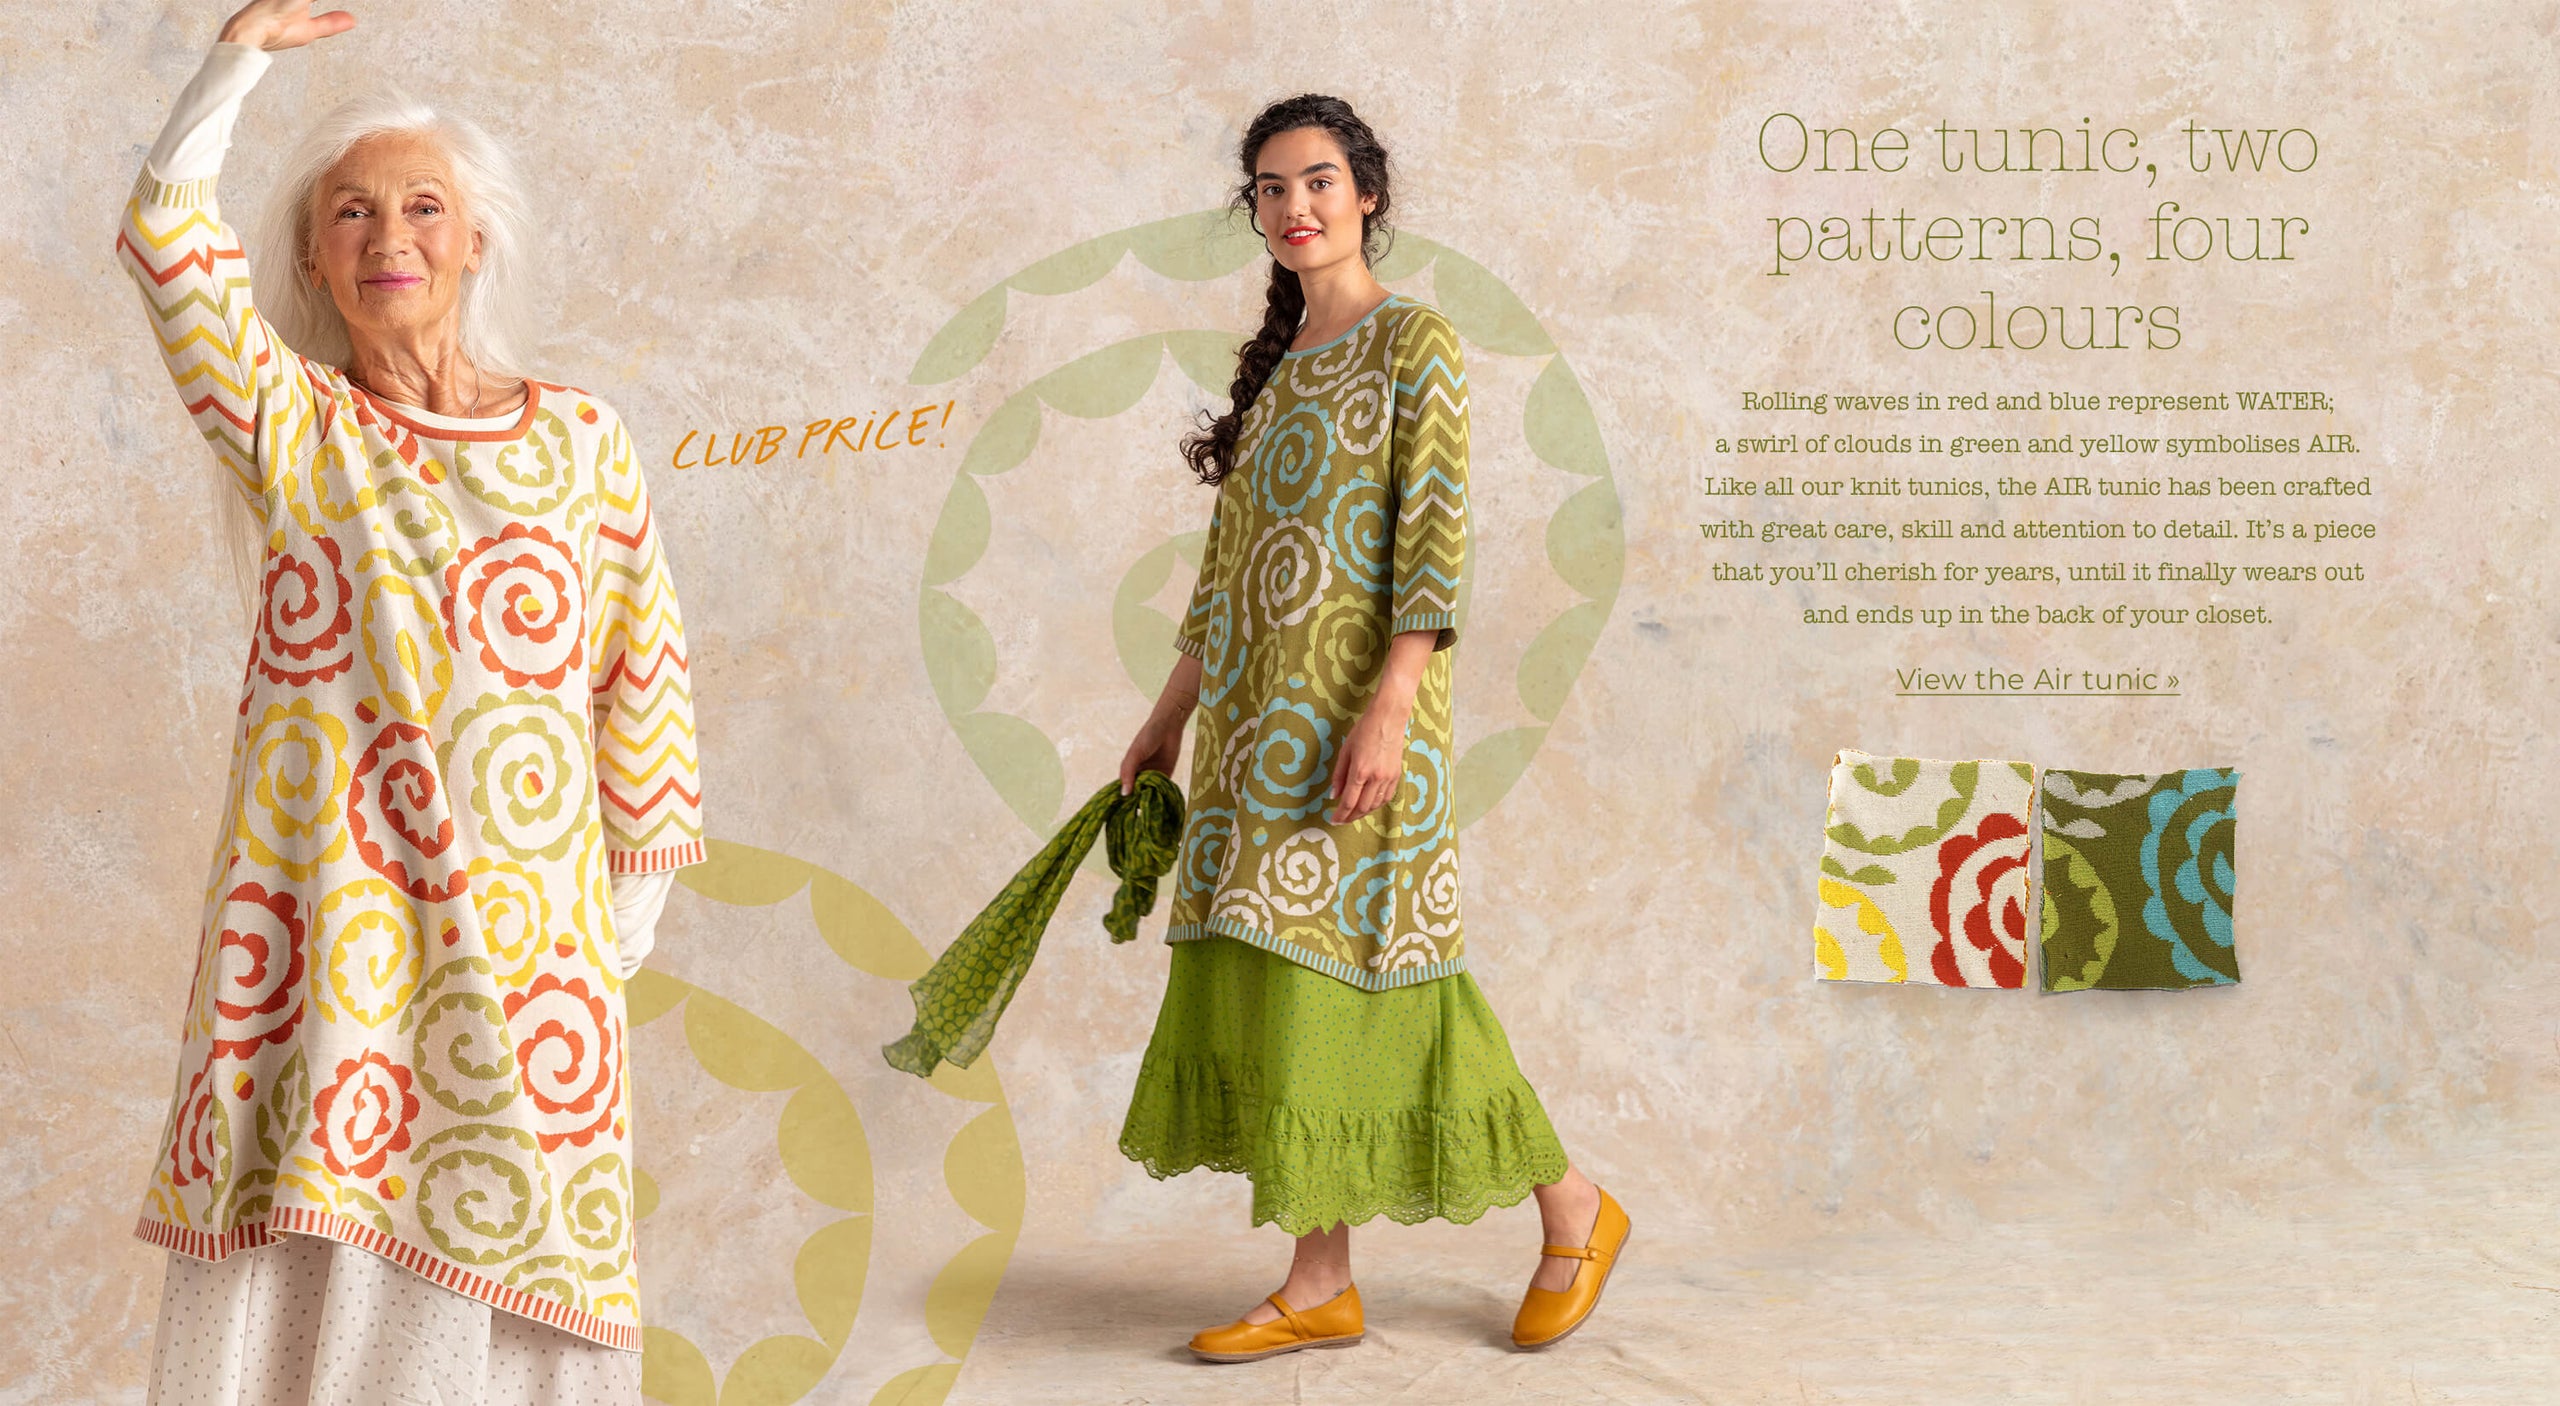 One tunic, two patterns, four colours